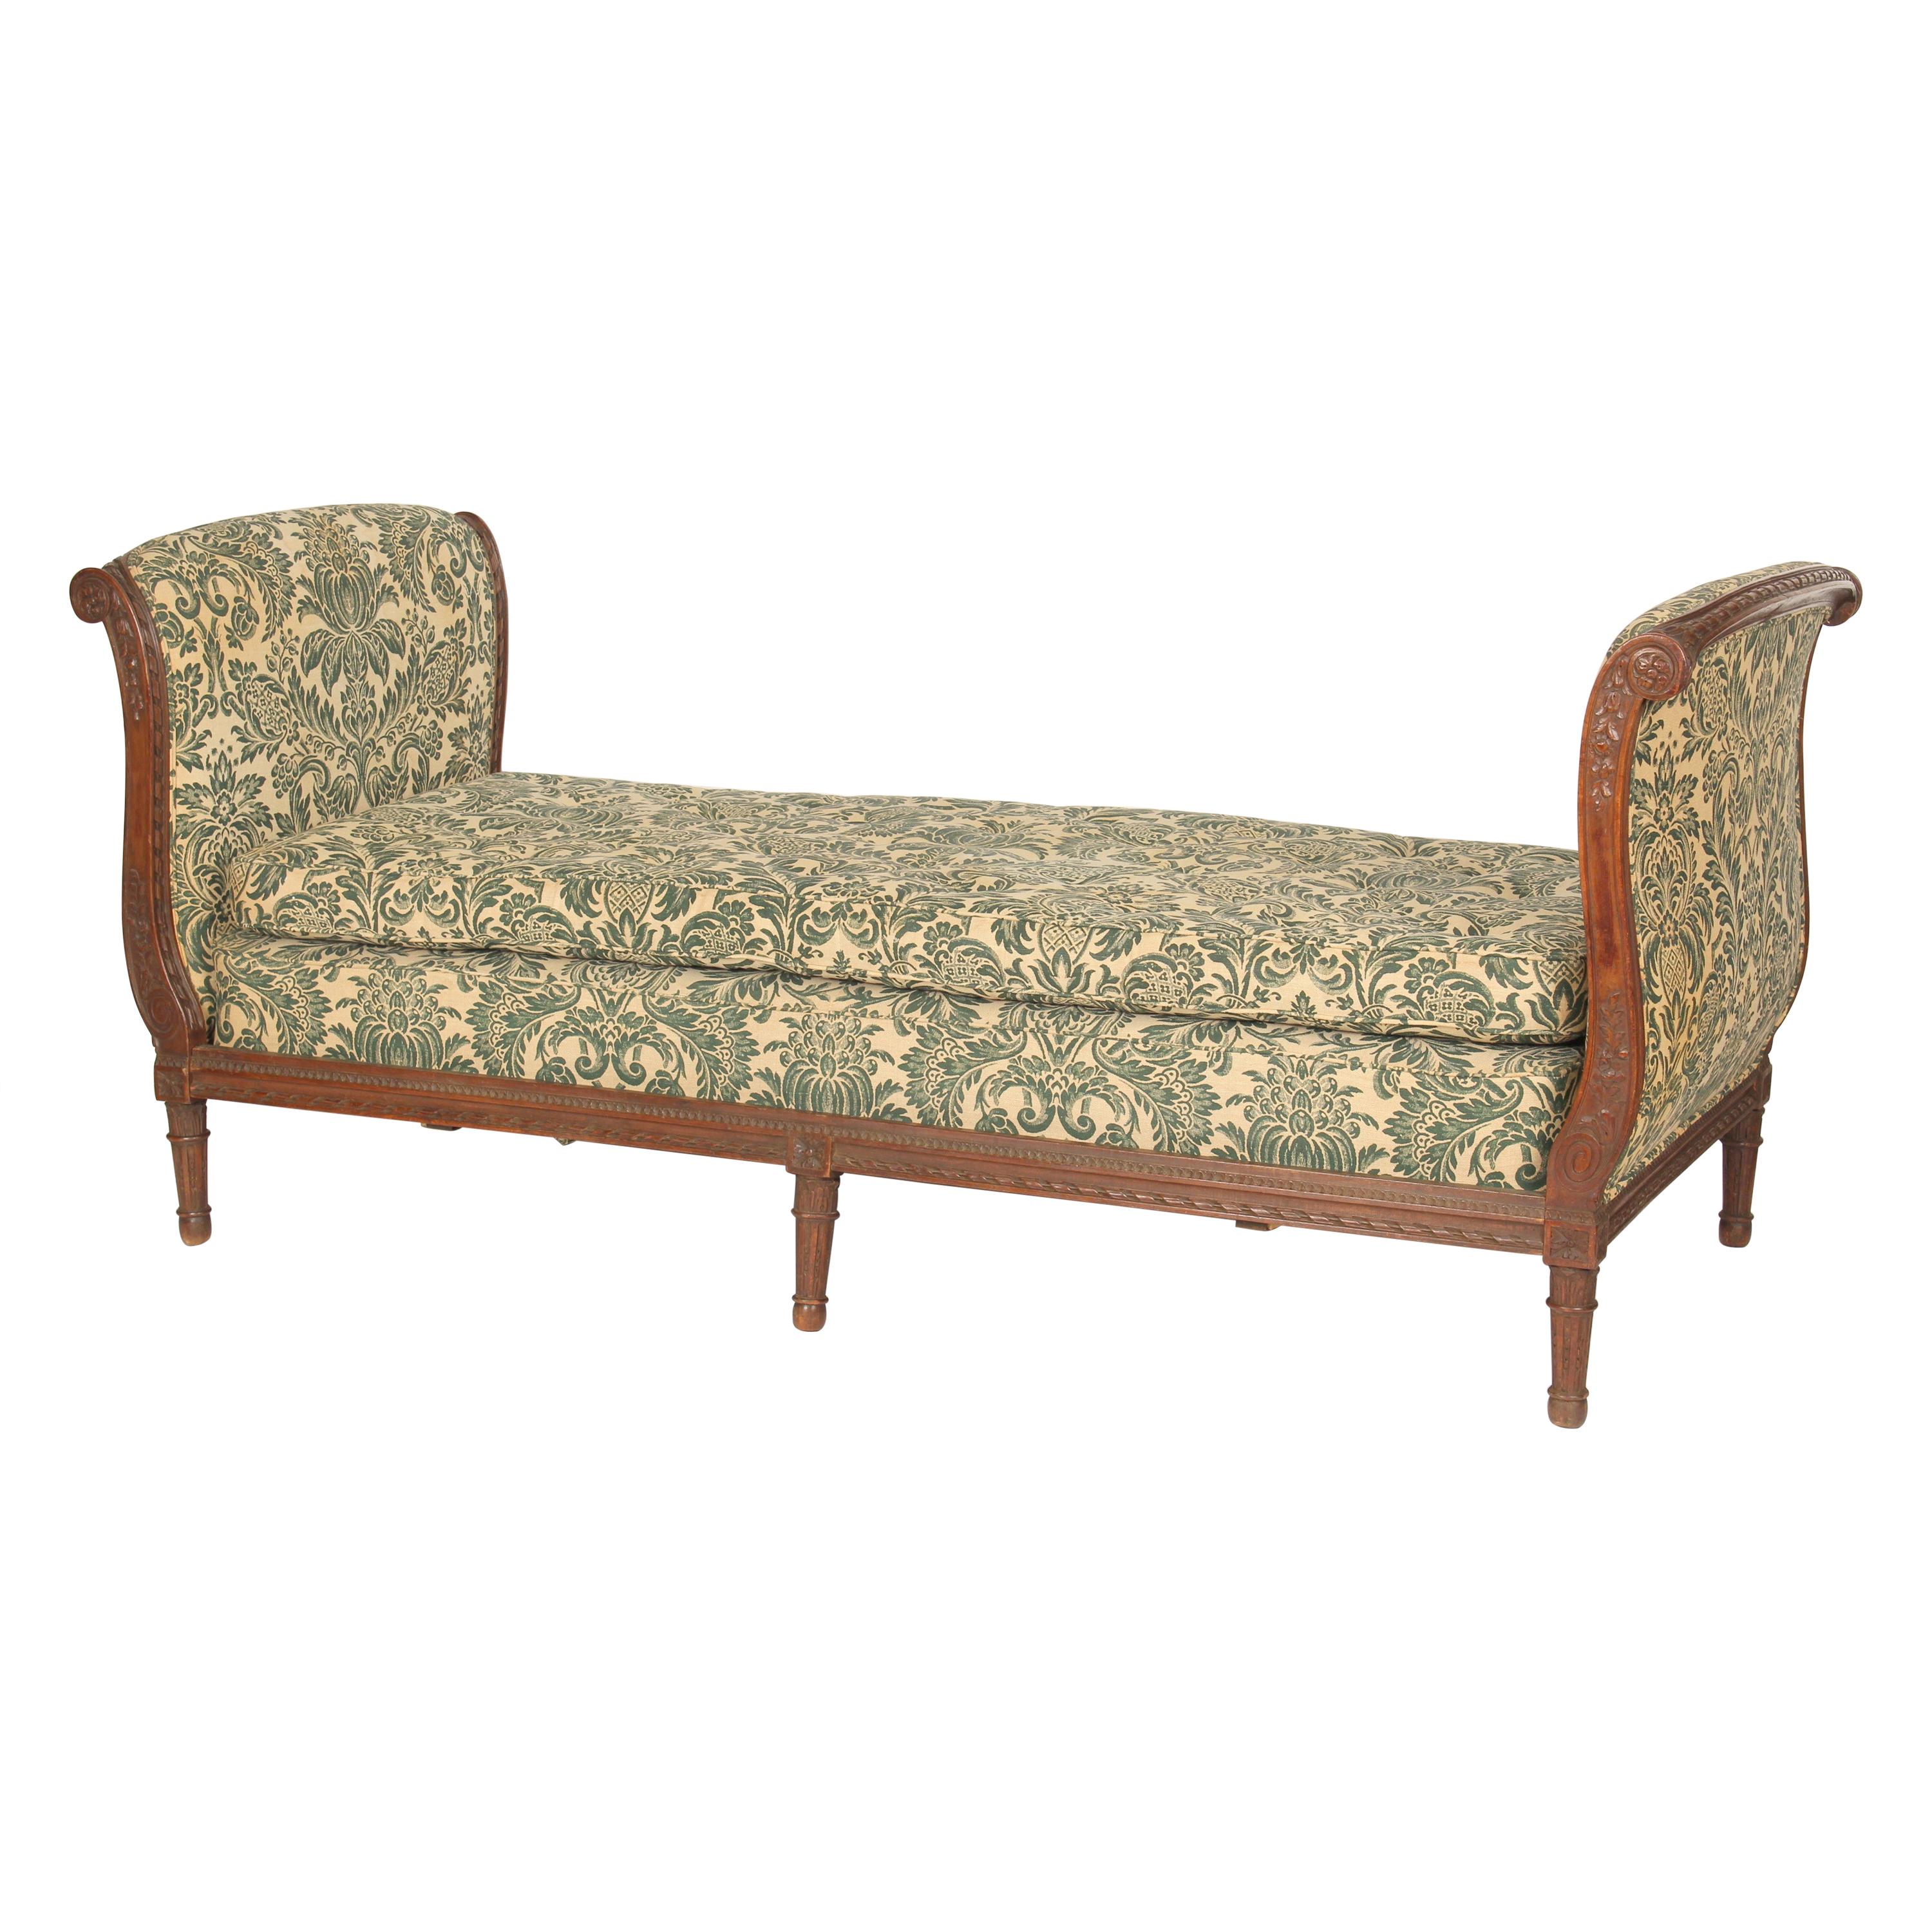 Antique Louis XVI Style Daybed